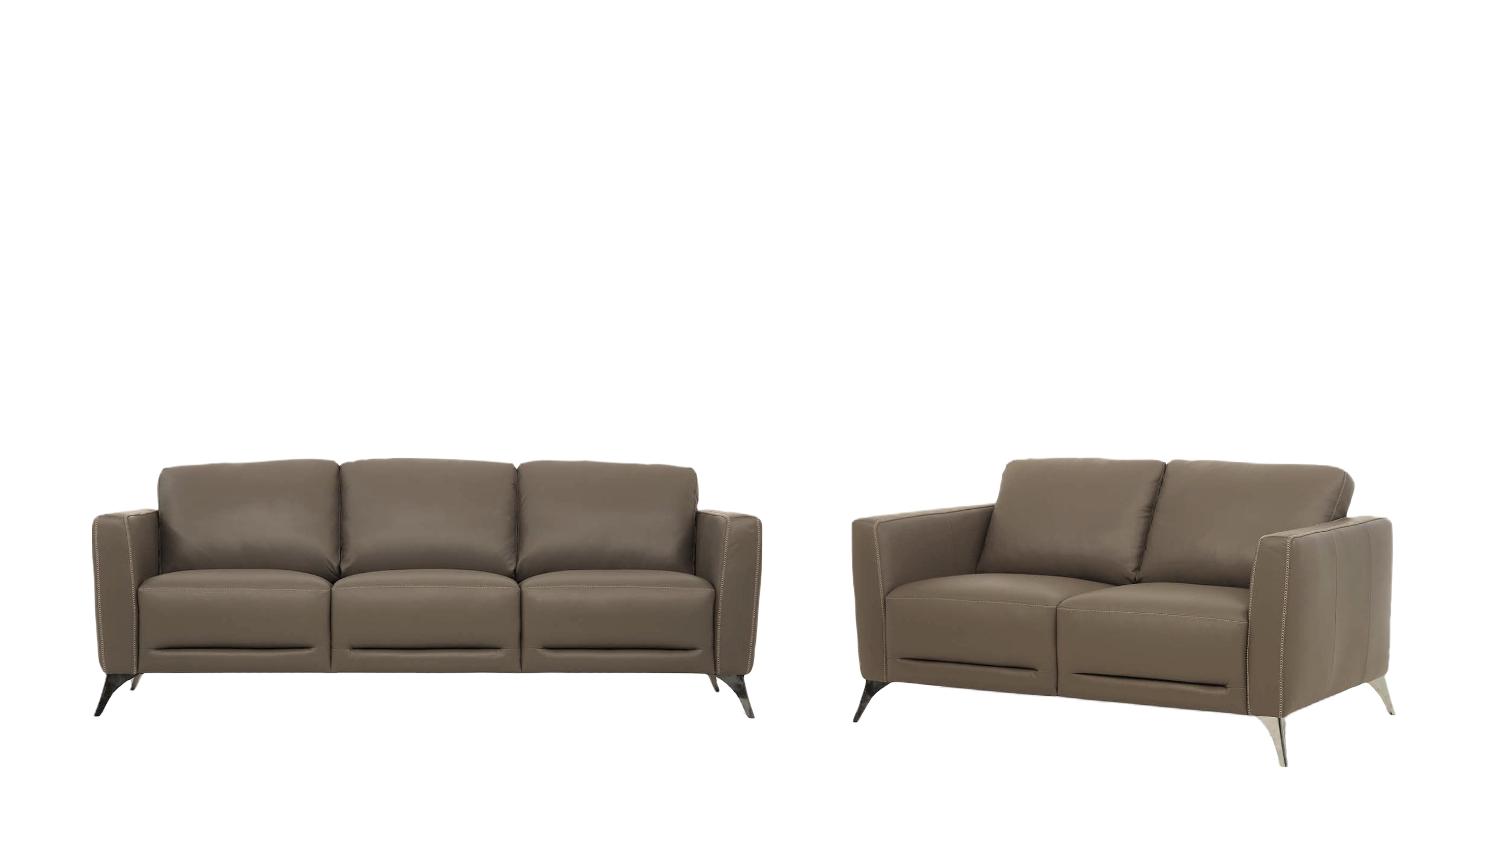 Transitional Sofa and Loveseat Set Malaga 55000-2pcs in Brown Leather